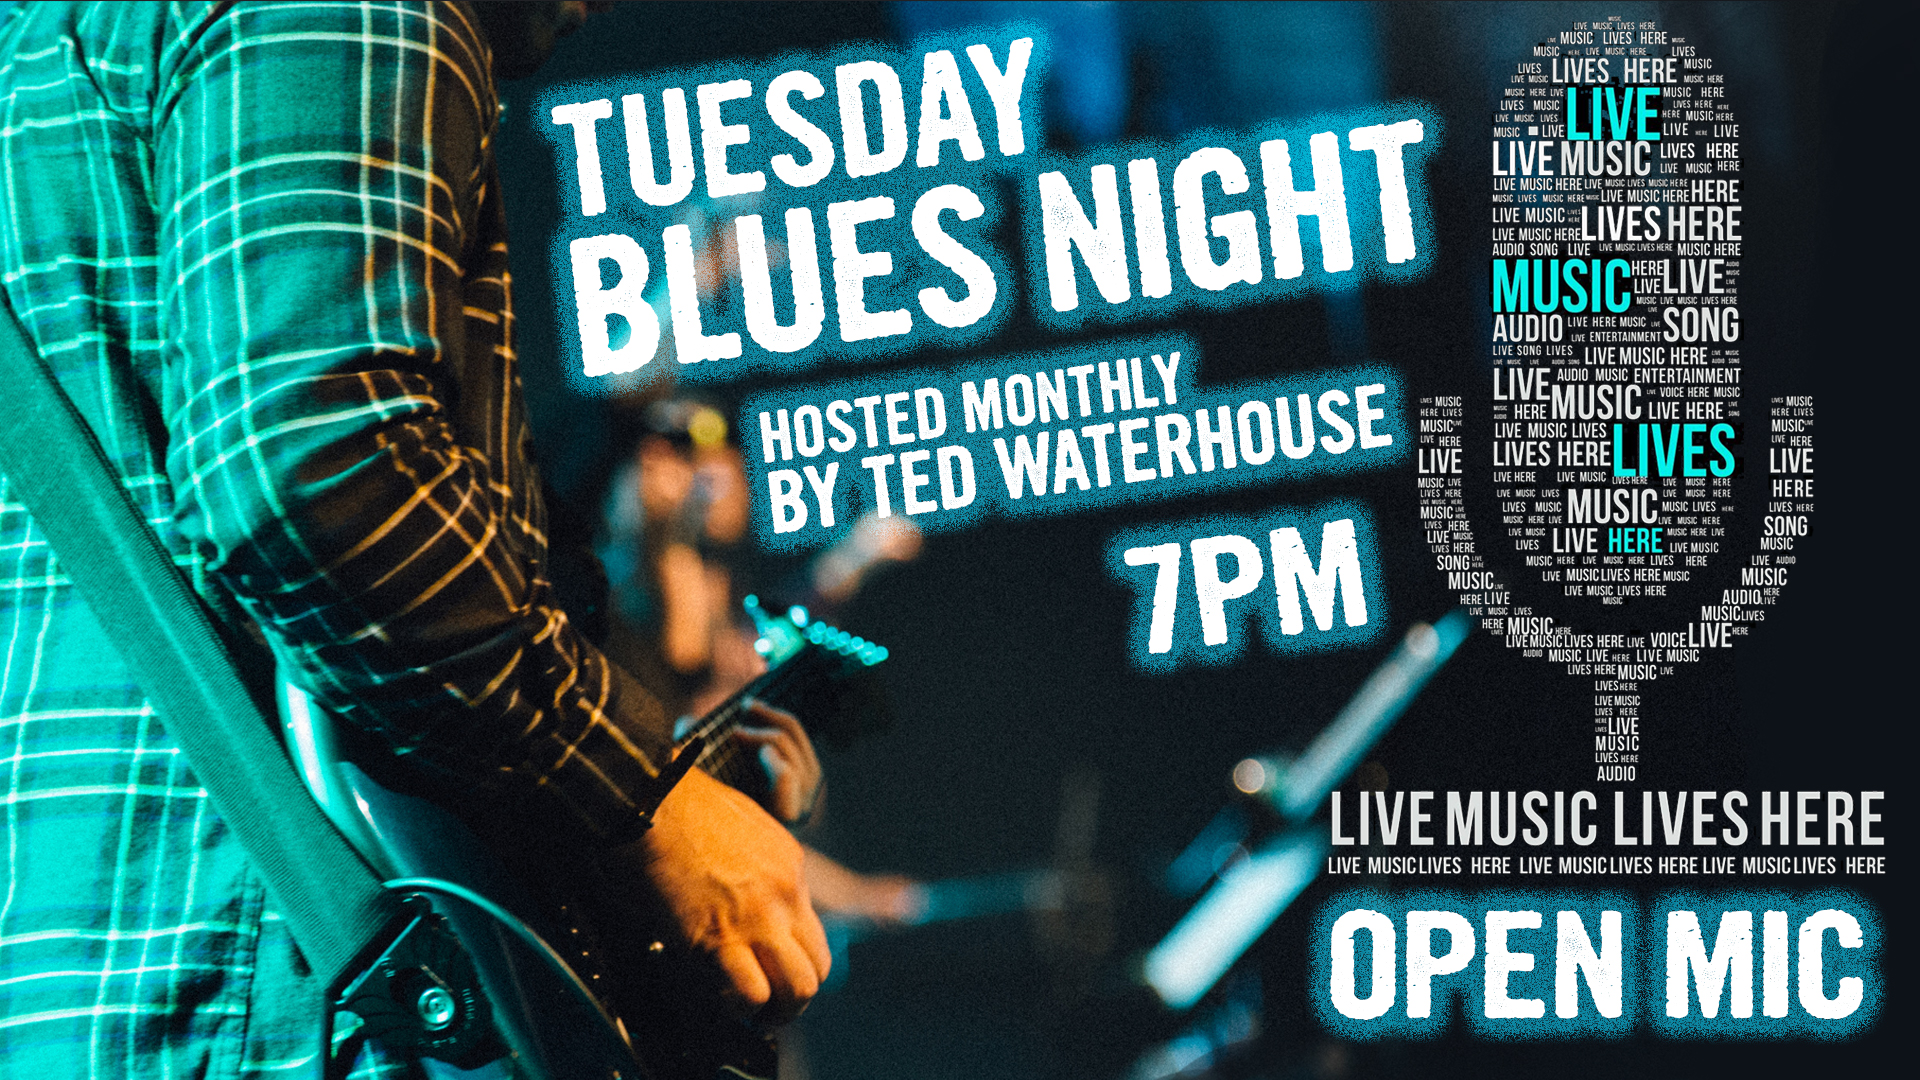 Ad for Tuesday Night Blues Night at The Siren 7 Pm Open Mic